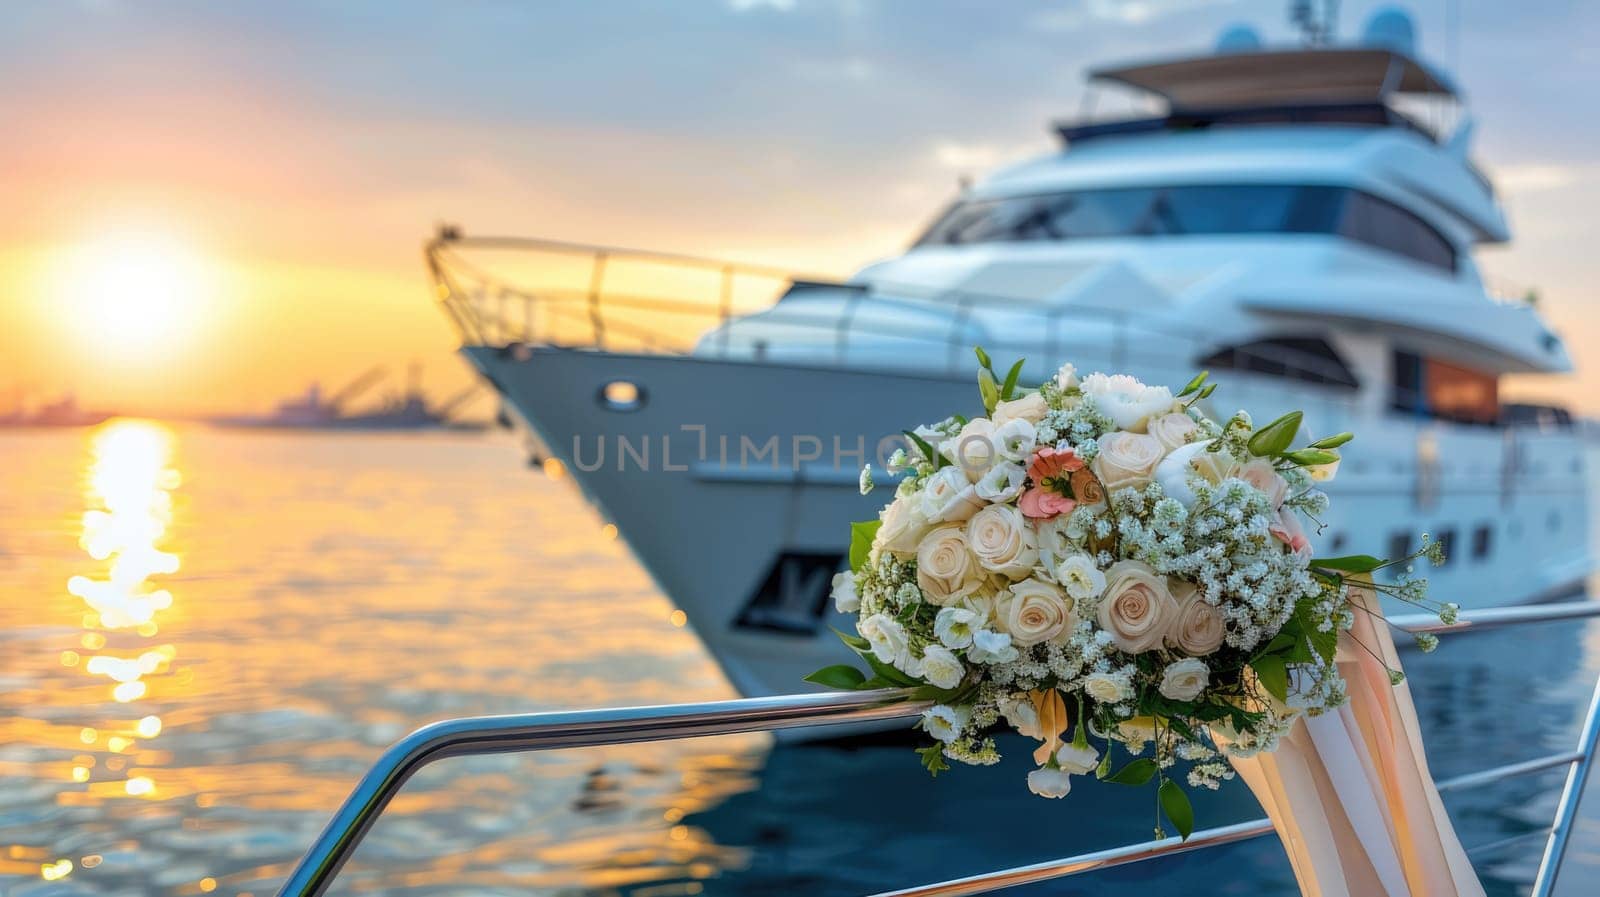 Wedding on a yacht. Wedding bouquet in the foreground. Blurred background by natali_brill